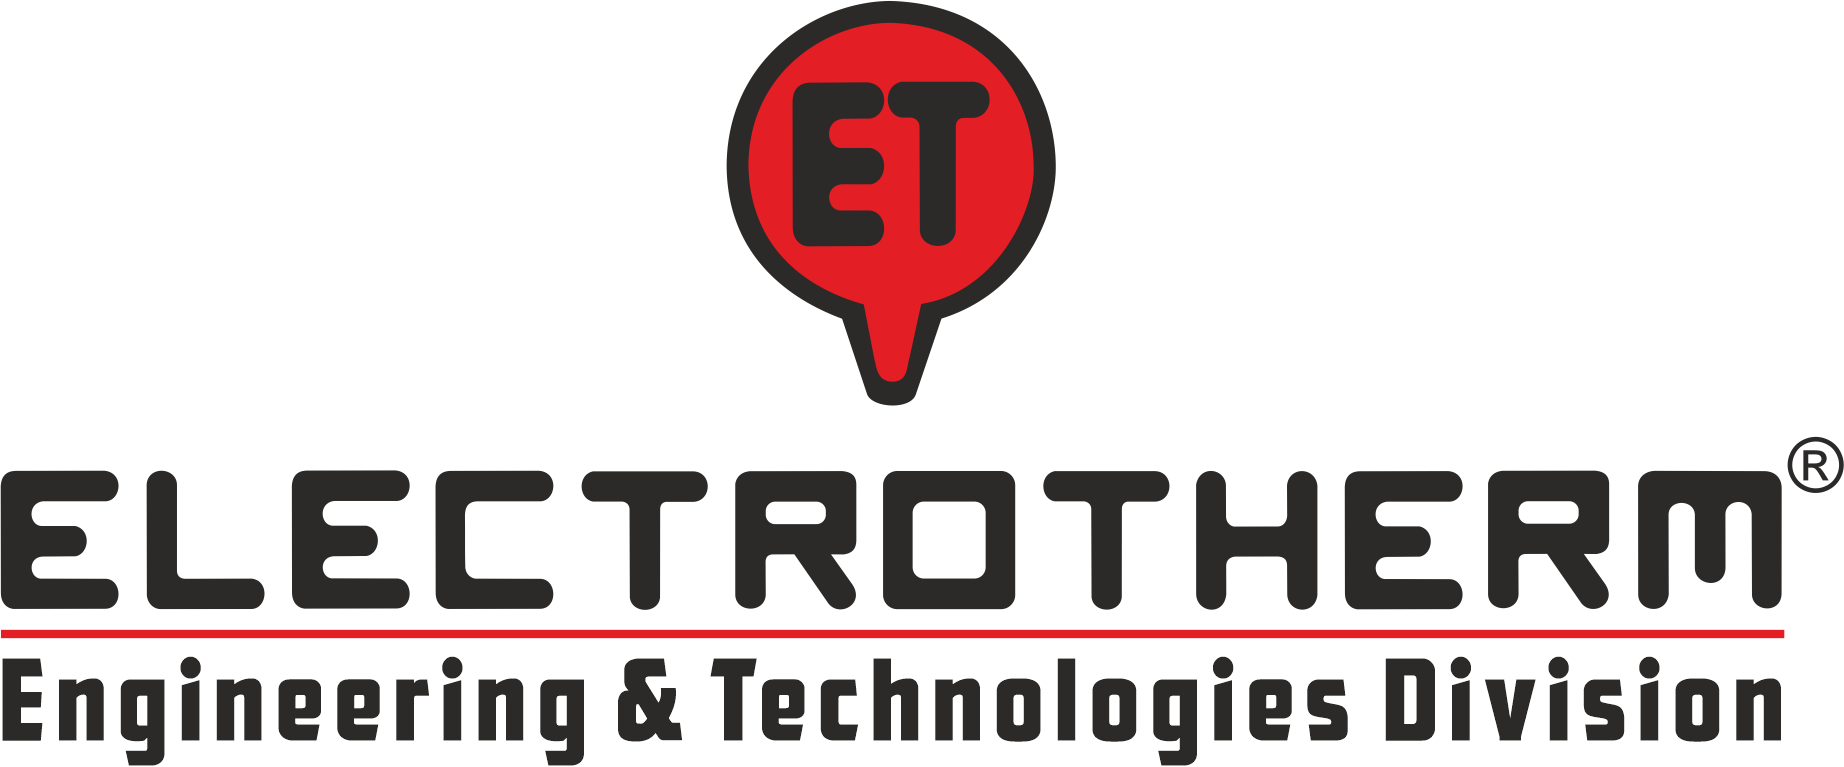 Electrotherm - Engineering & Technologies